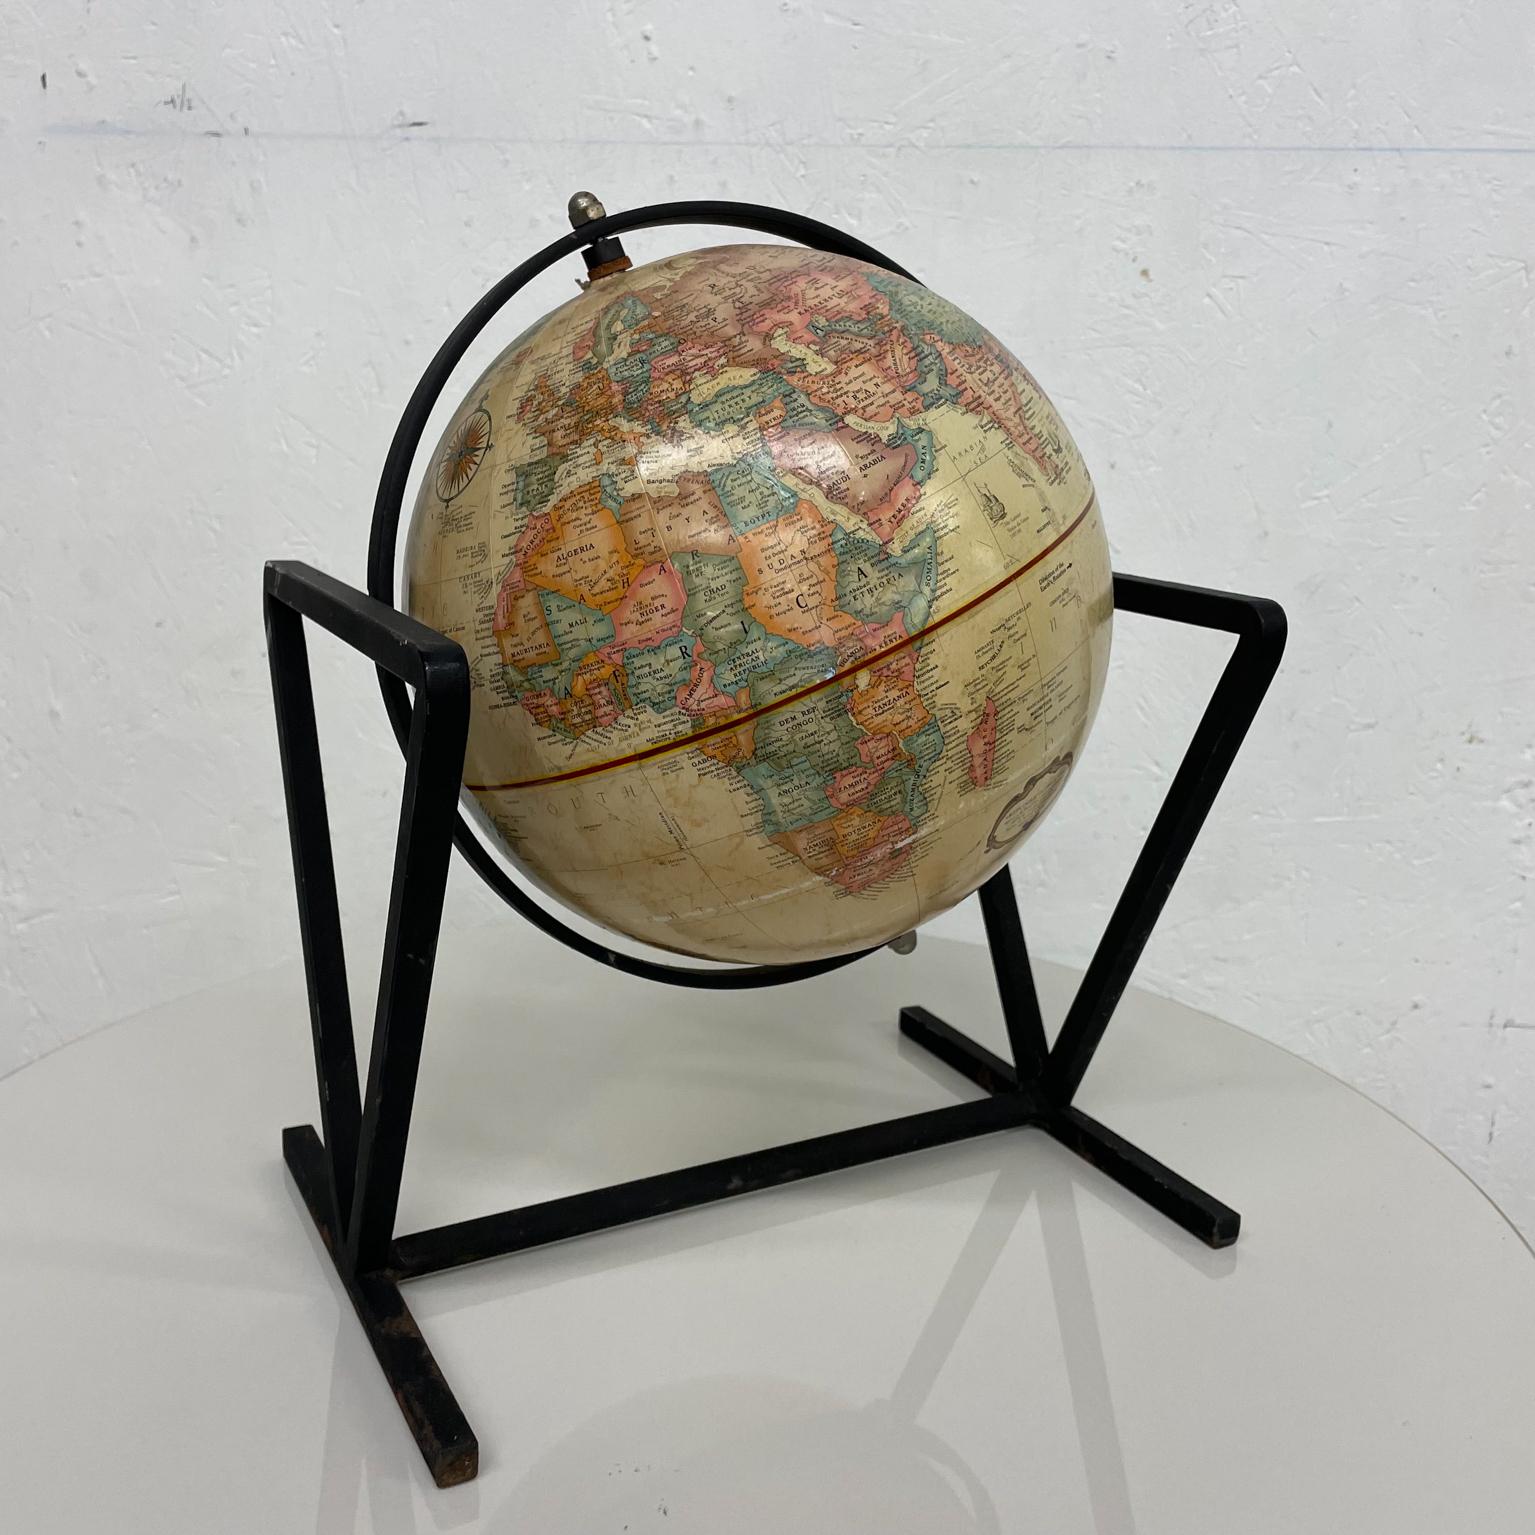 Modern Grand World Globe Terrestre Replogle Globes Inc
circa 1970s
Vintage black metal 
11 width x 13.5 tall x 9 depth
Preowned original vintage condition scuffs and nicks present.
See images provided.
 